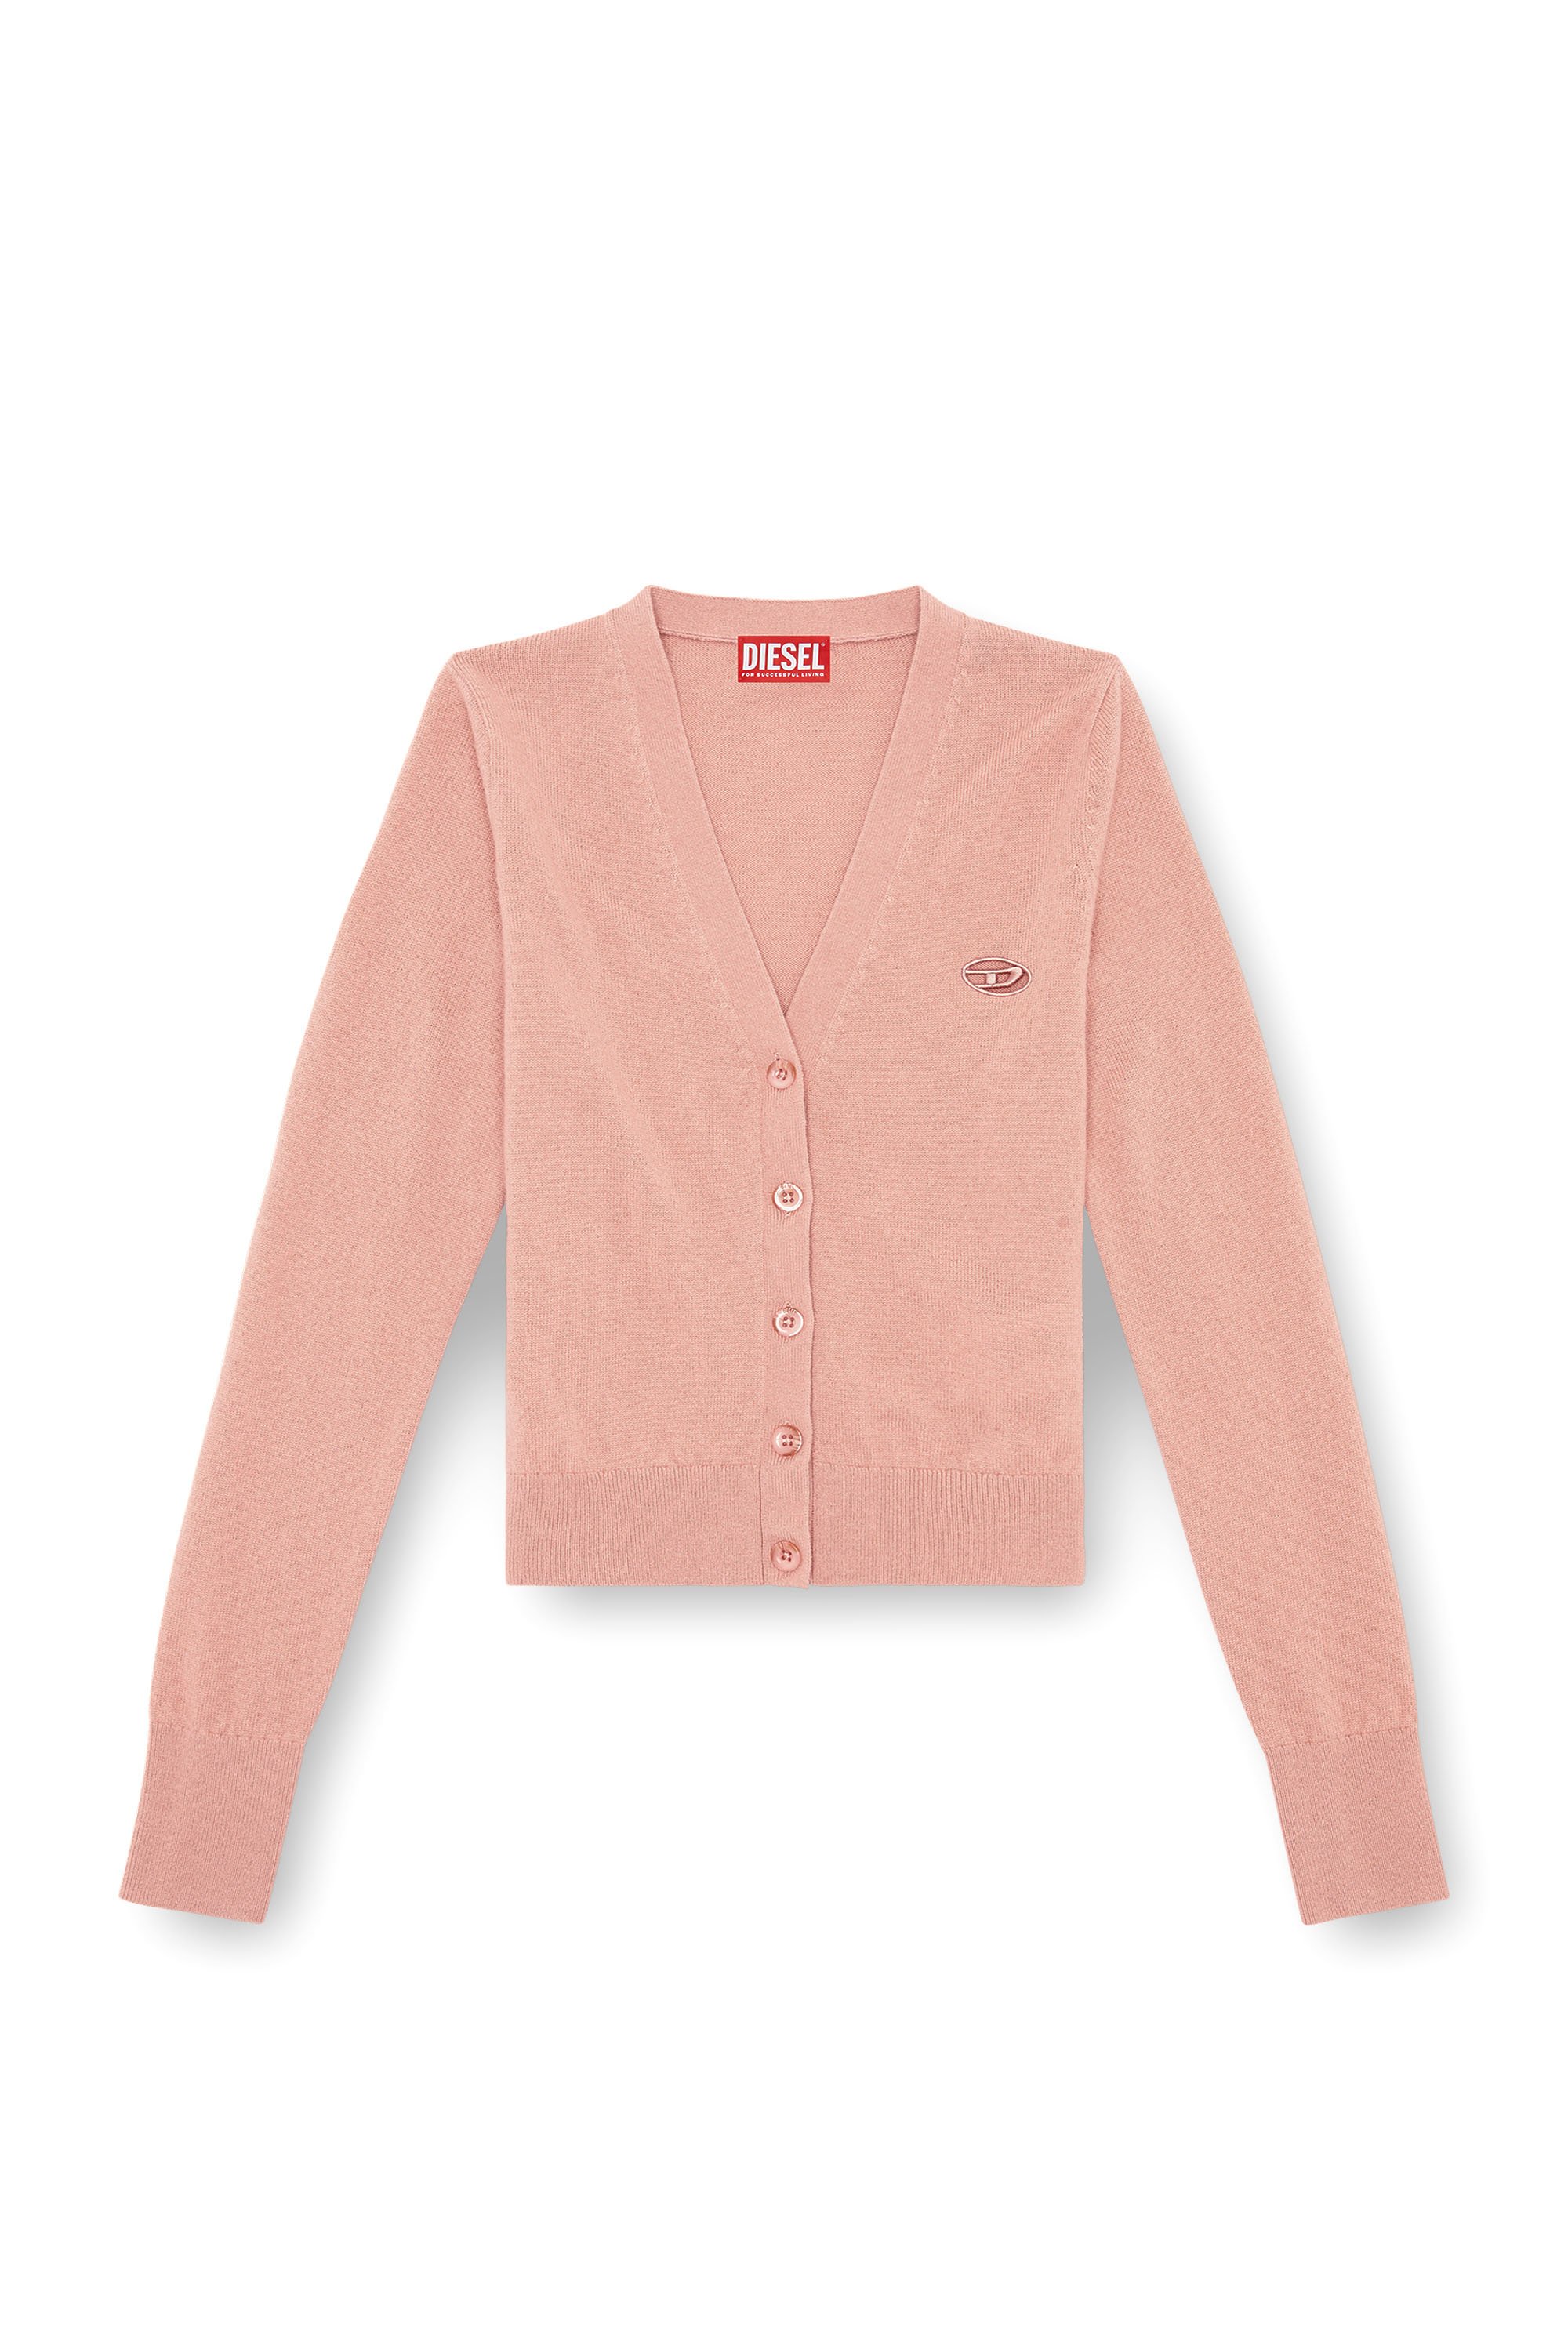 Diesel - M-ARTE, Woman Wool and cashmere cardigan in Pink - Image 6